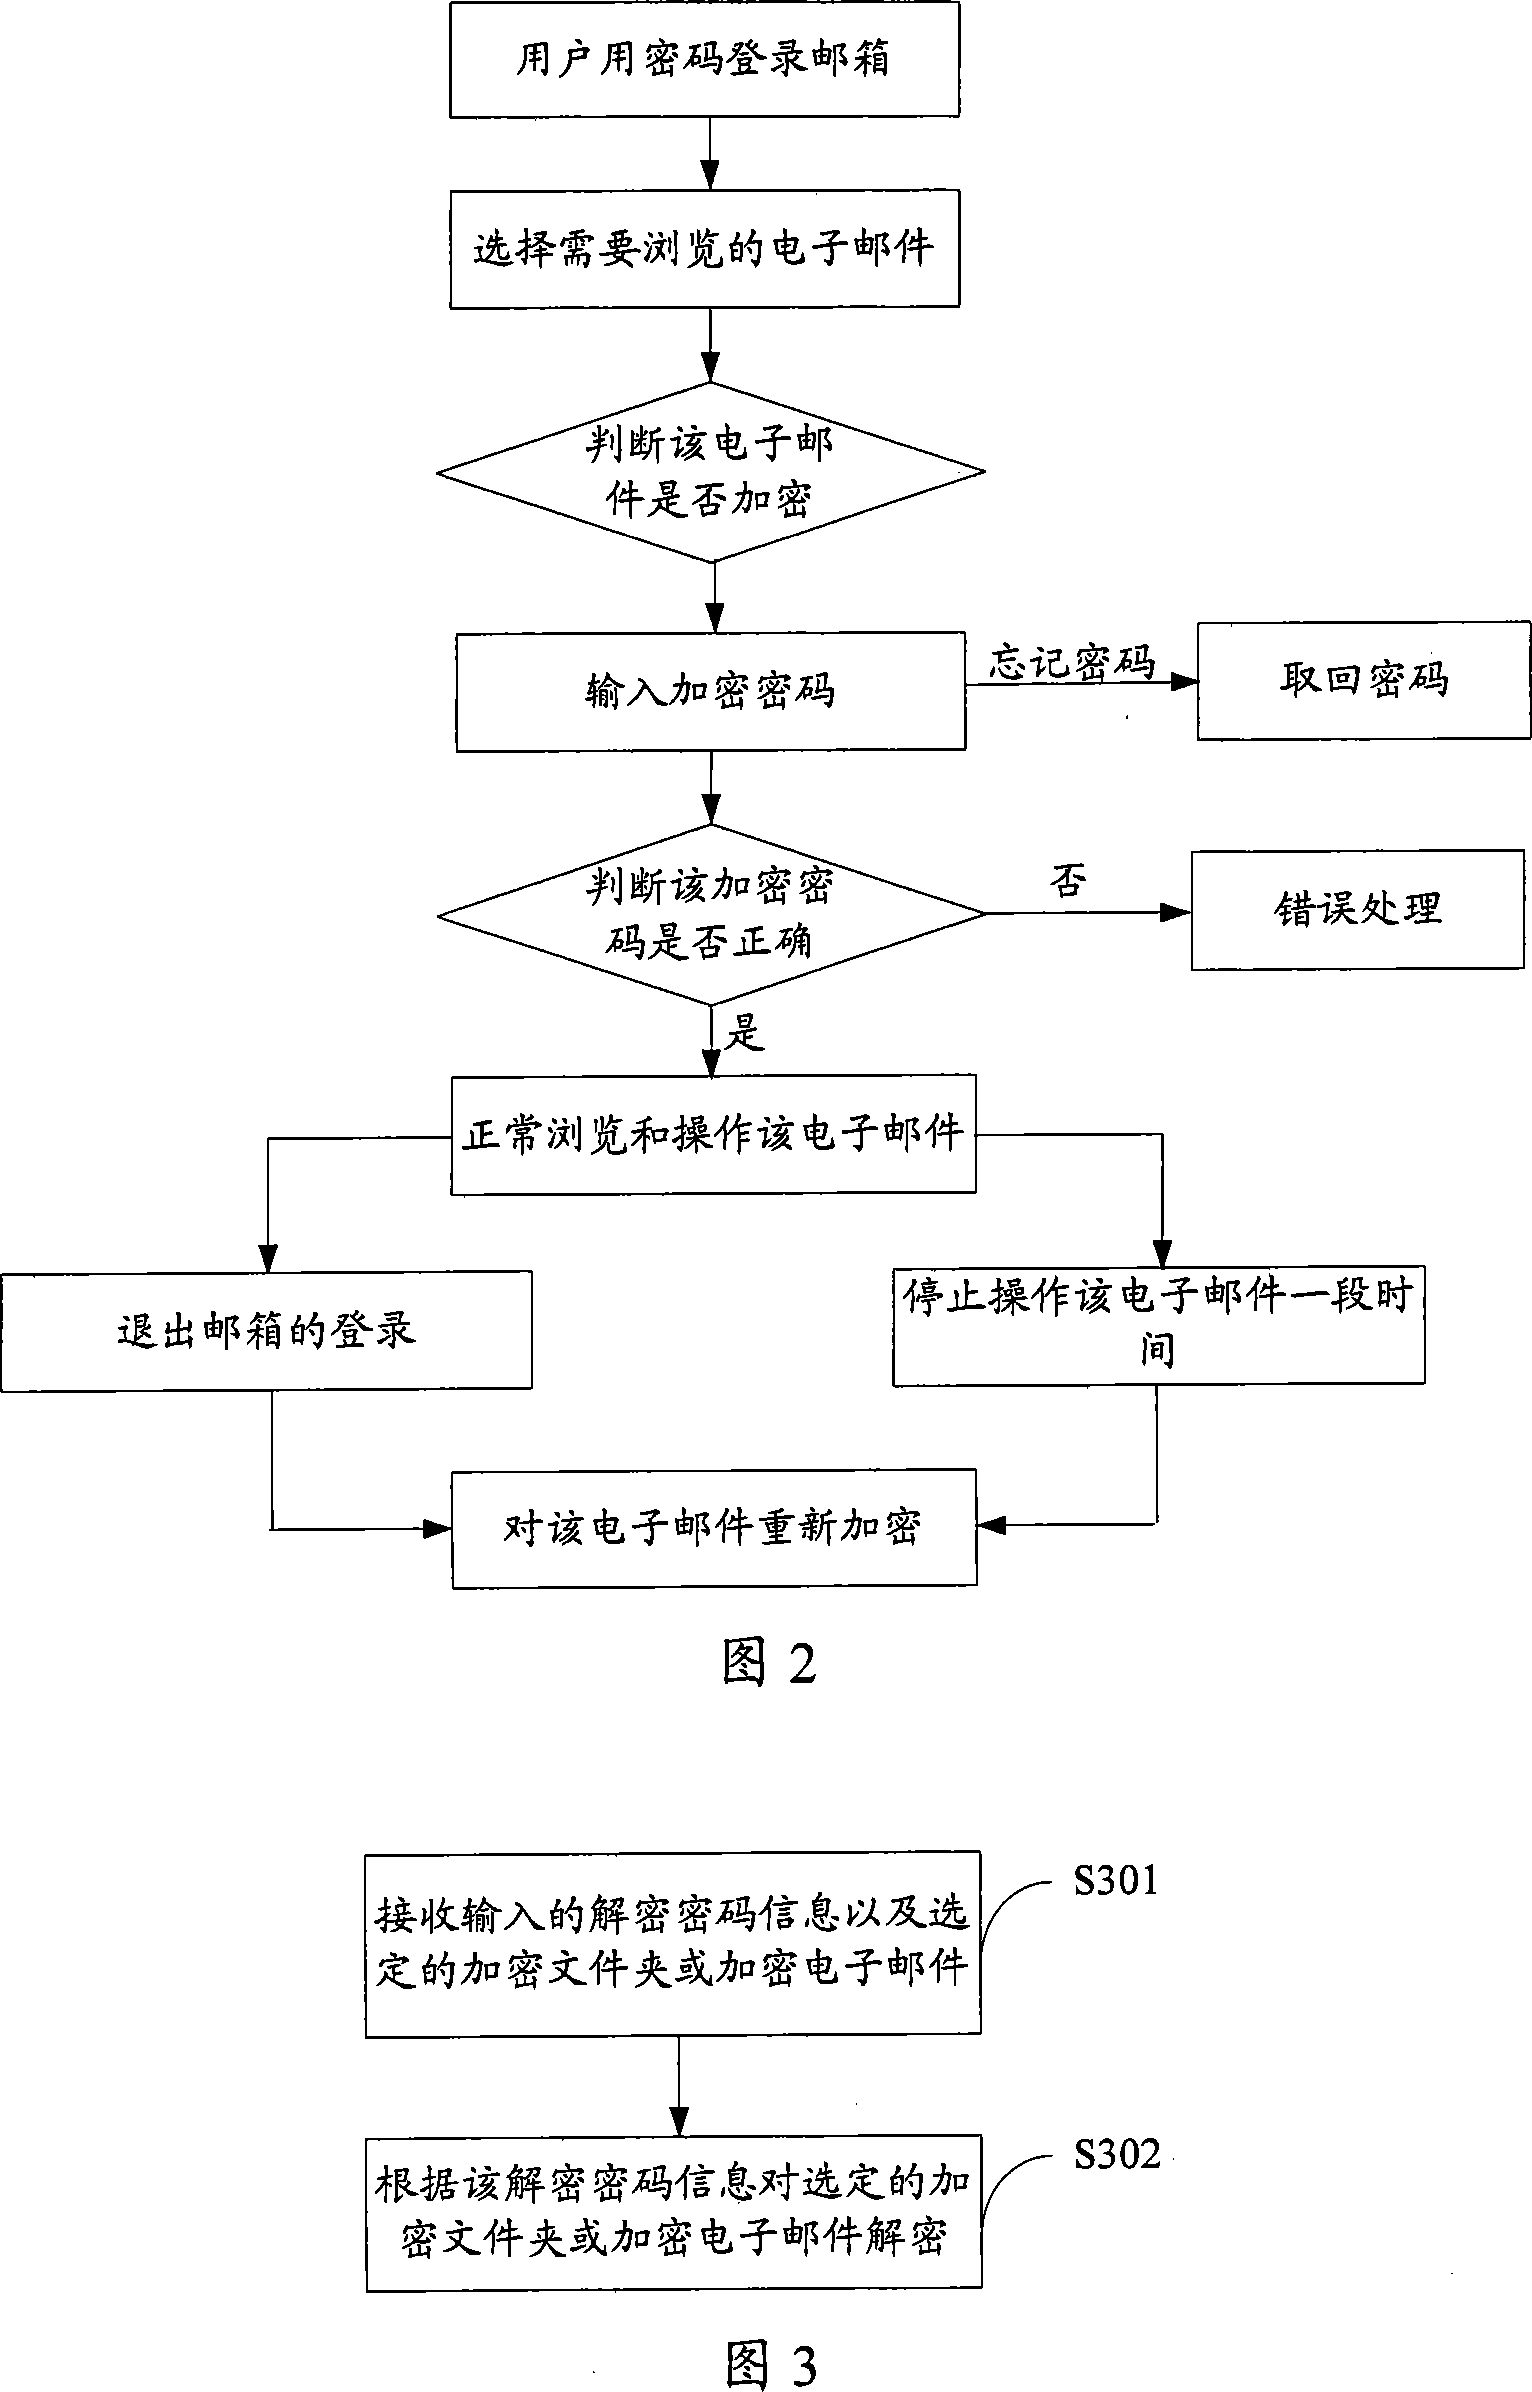 Method and system for encrypting and deciphering E-mail